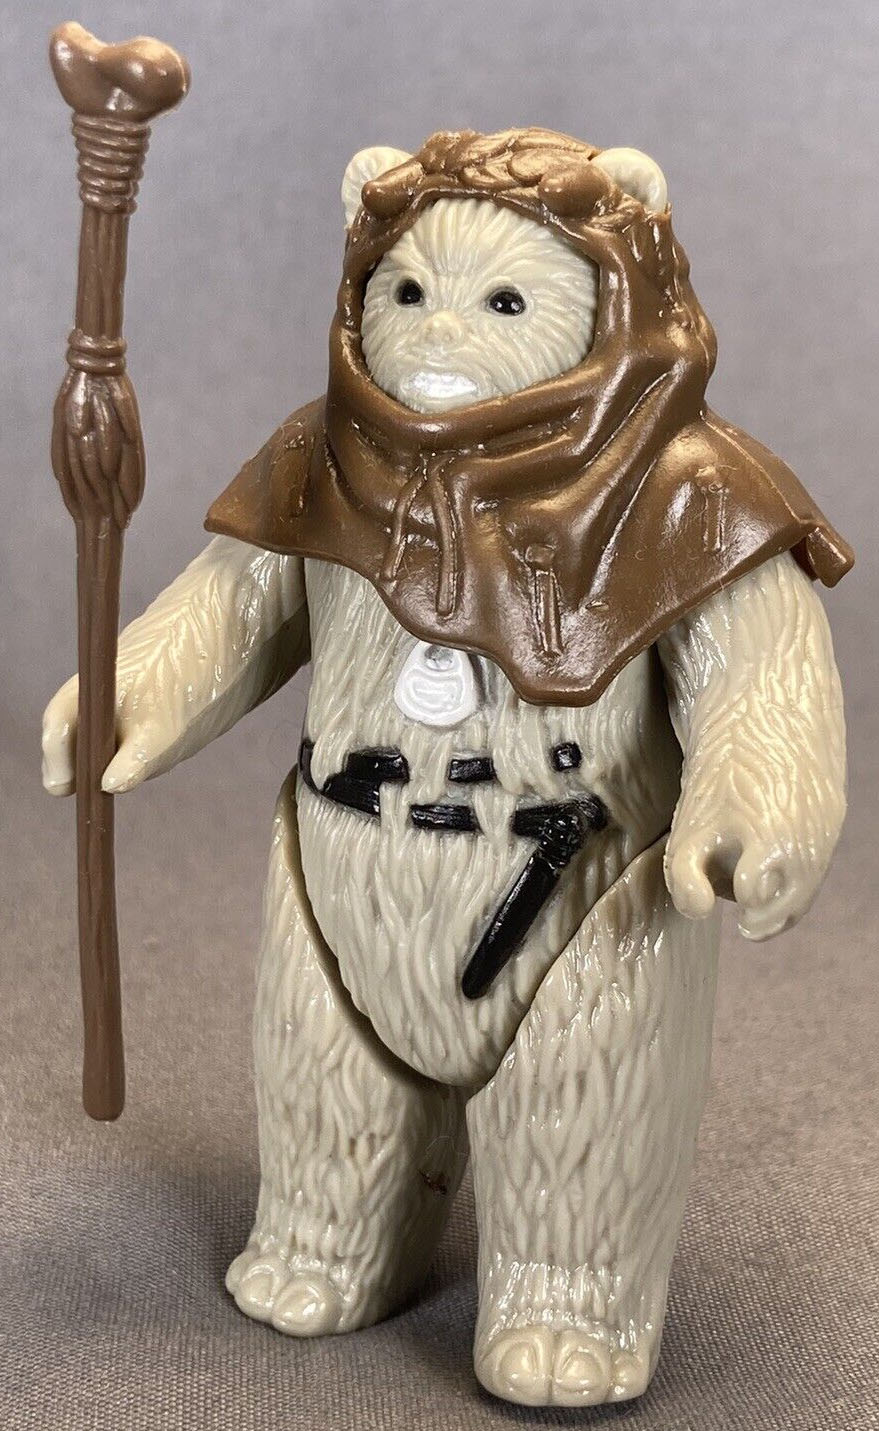 Star Wars (Ewok) Chief Chirpa 3.75 Inch Action Figure - Used